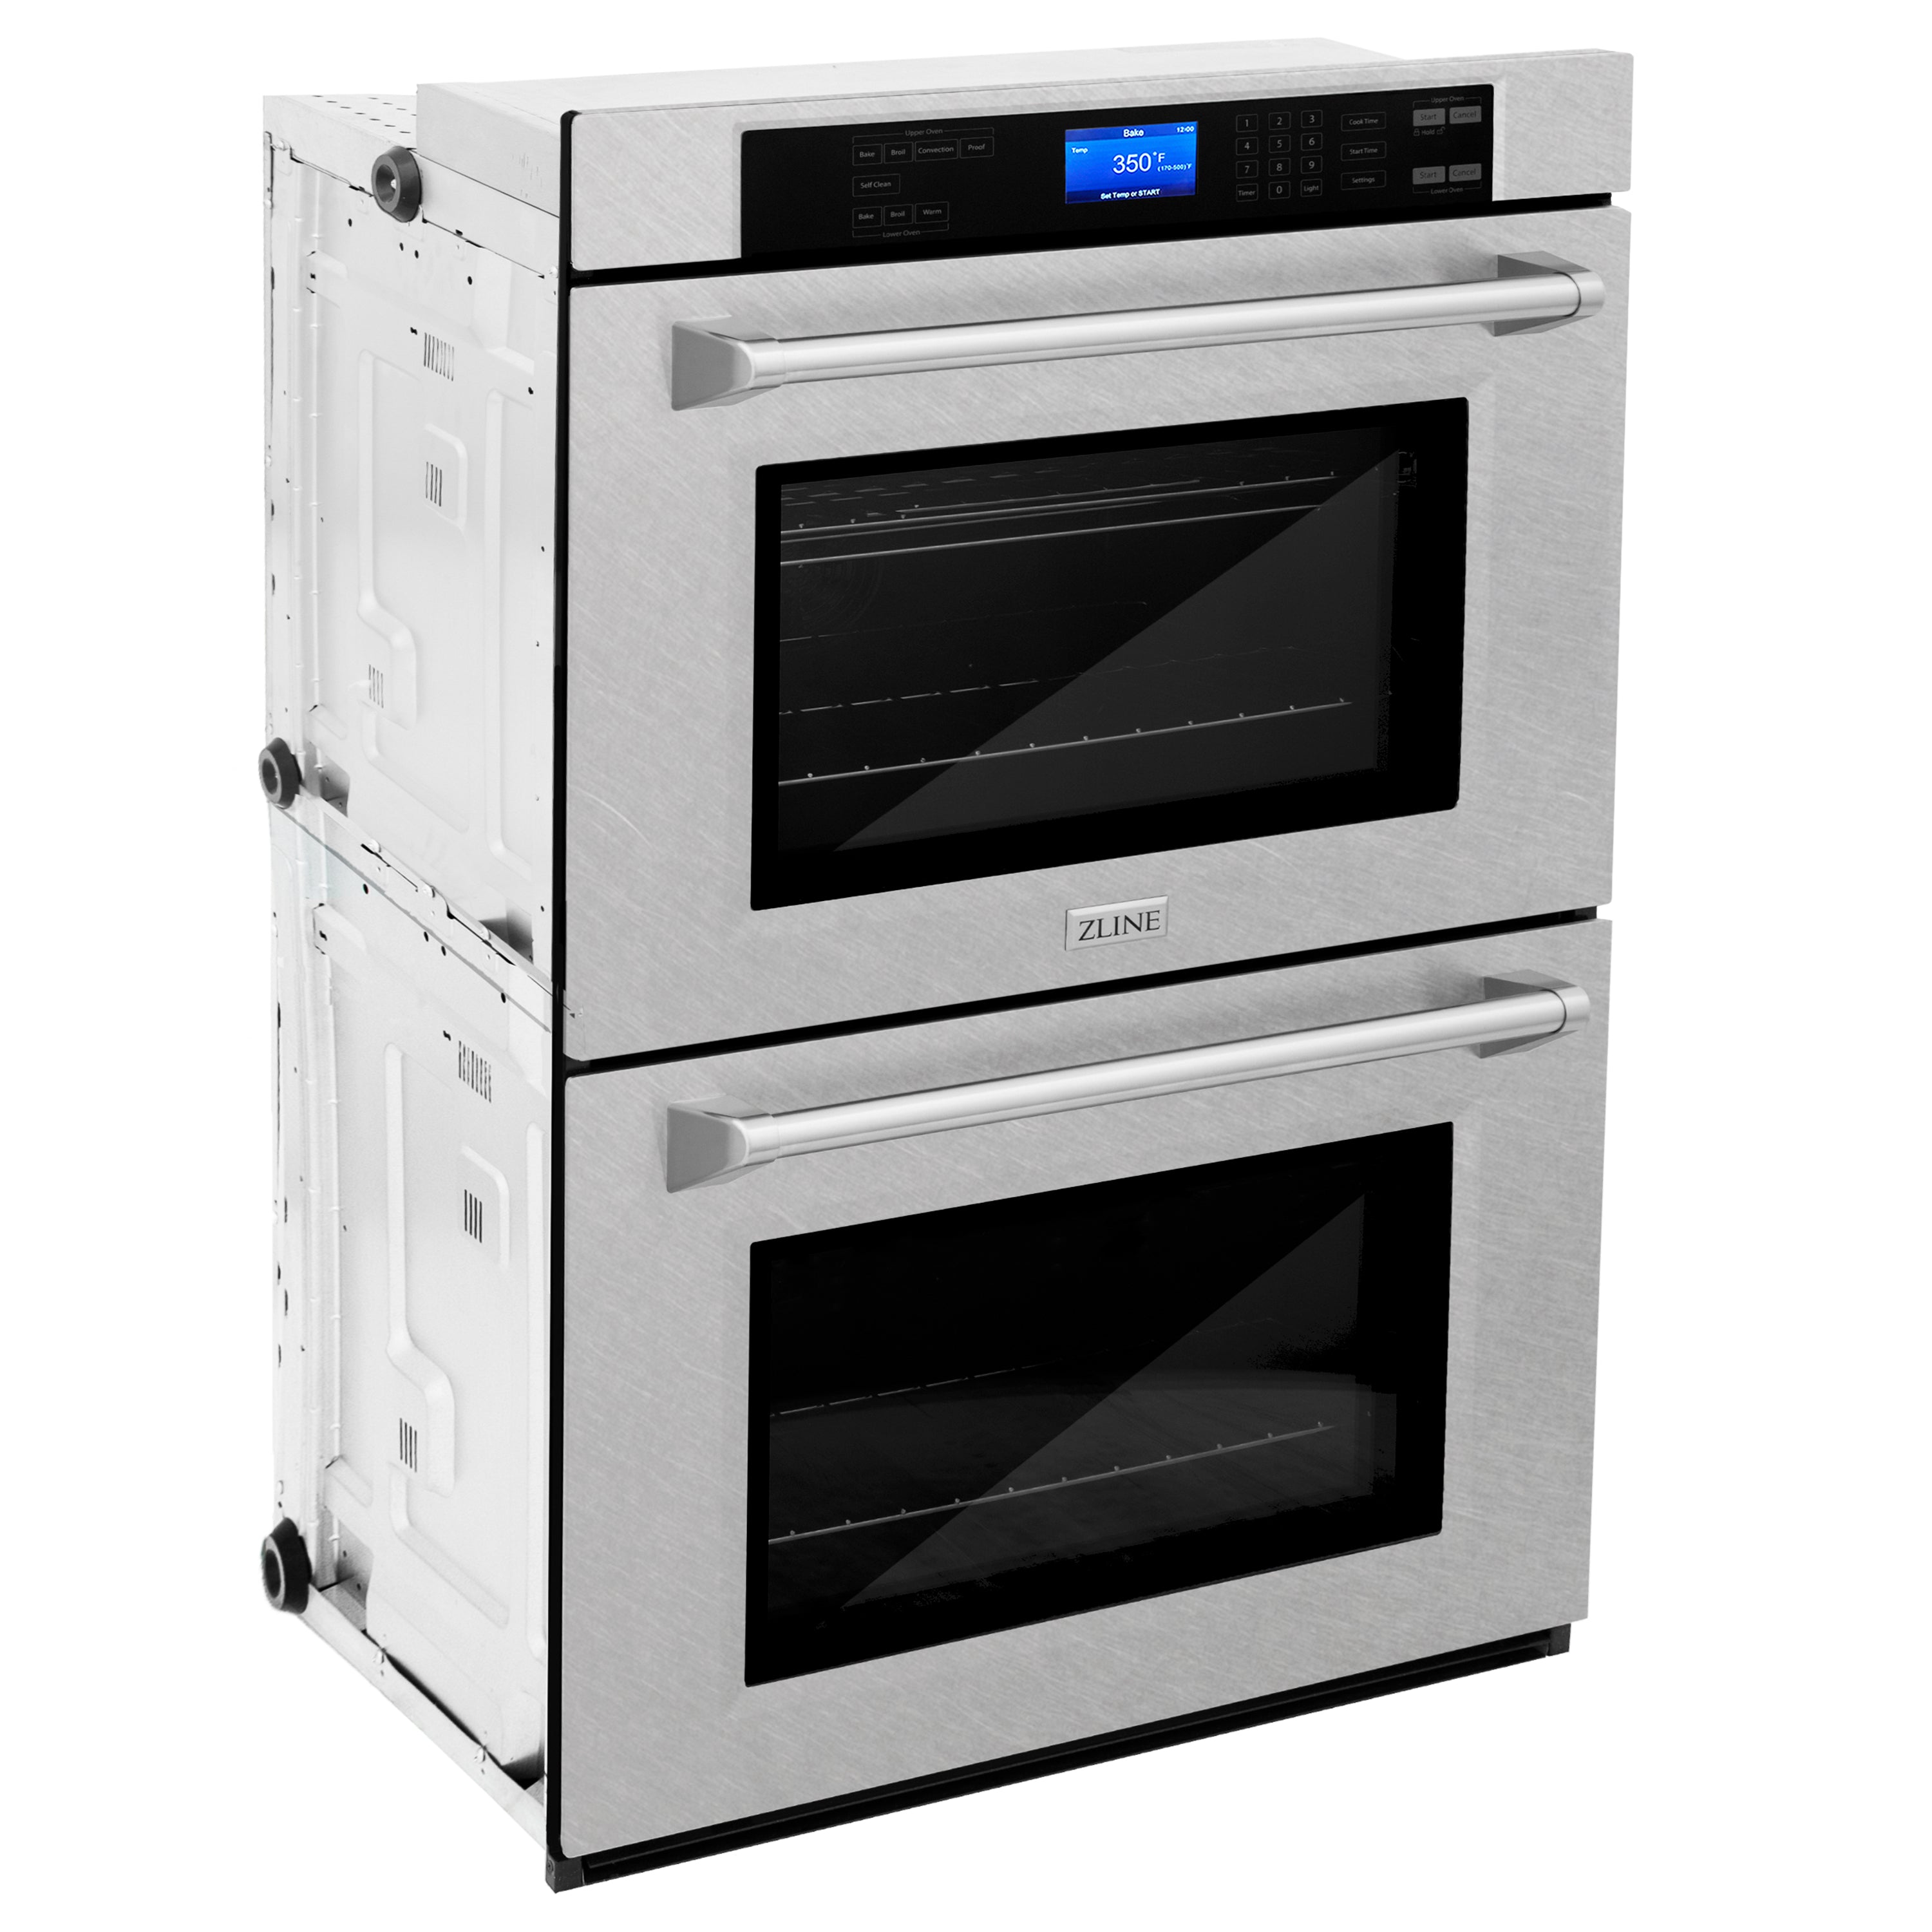 ZLINE 30 in. Professional Double Wall Oven with Self Clean (AWD-30) - New Star Living